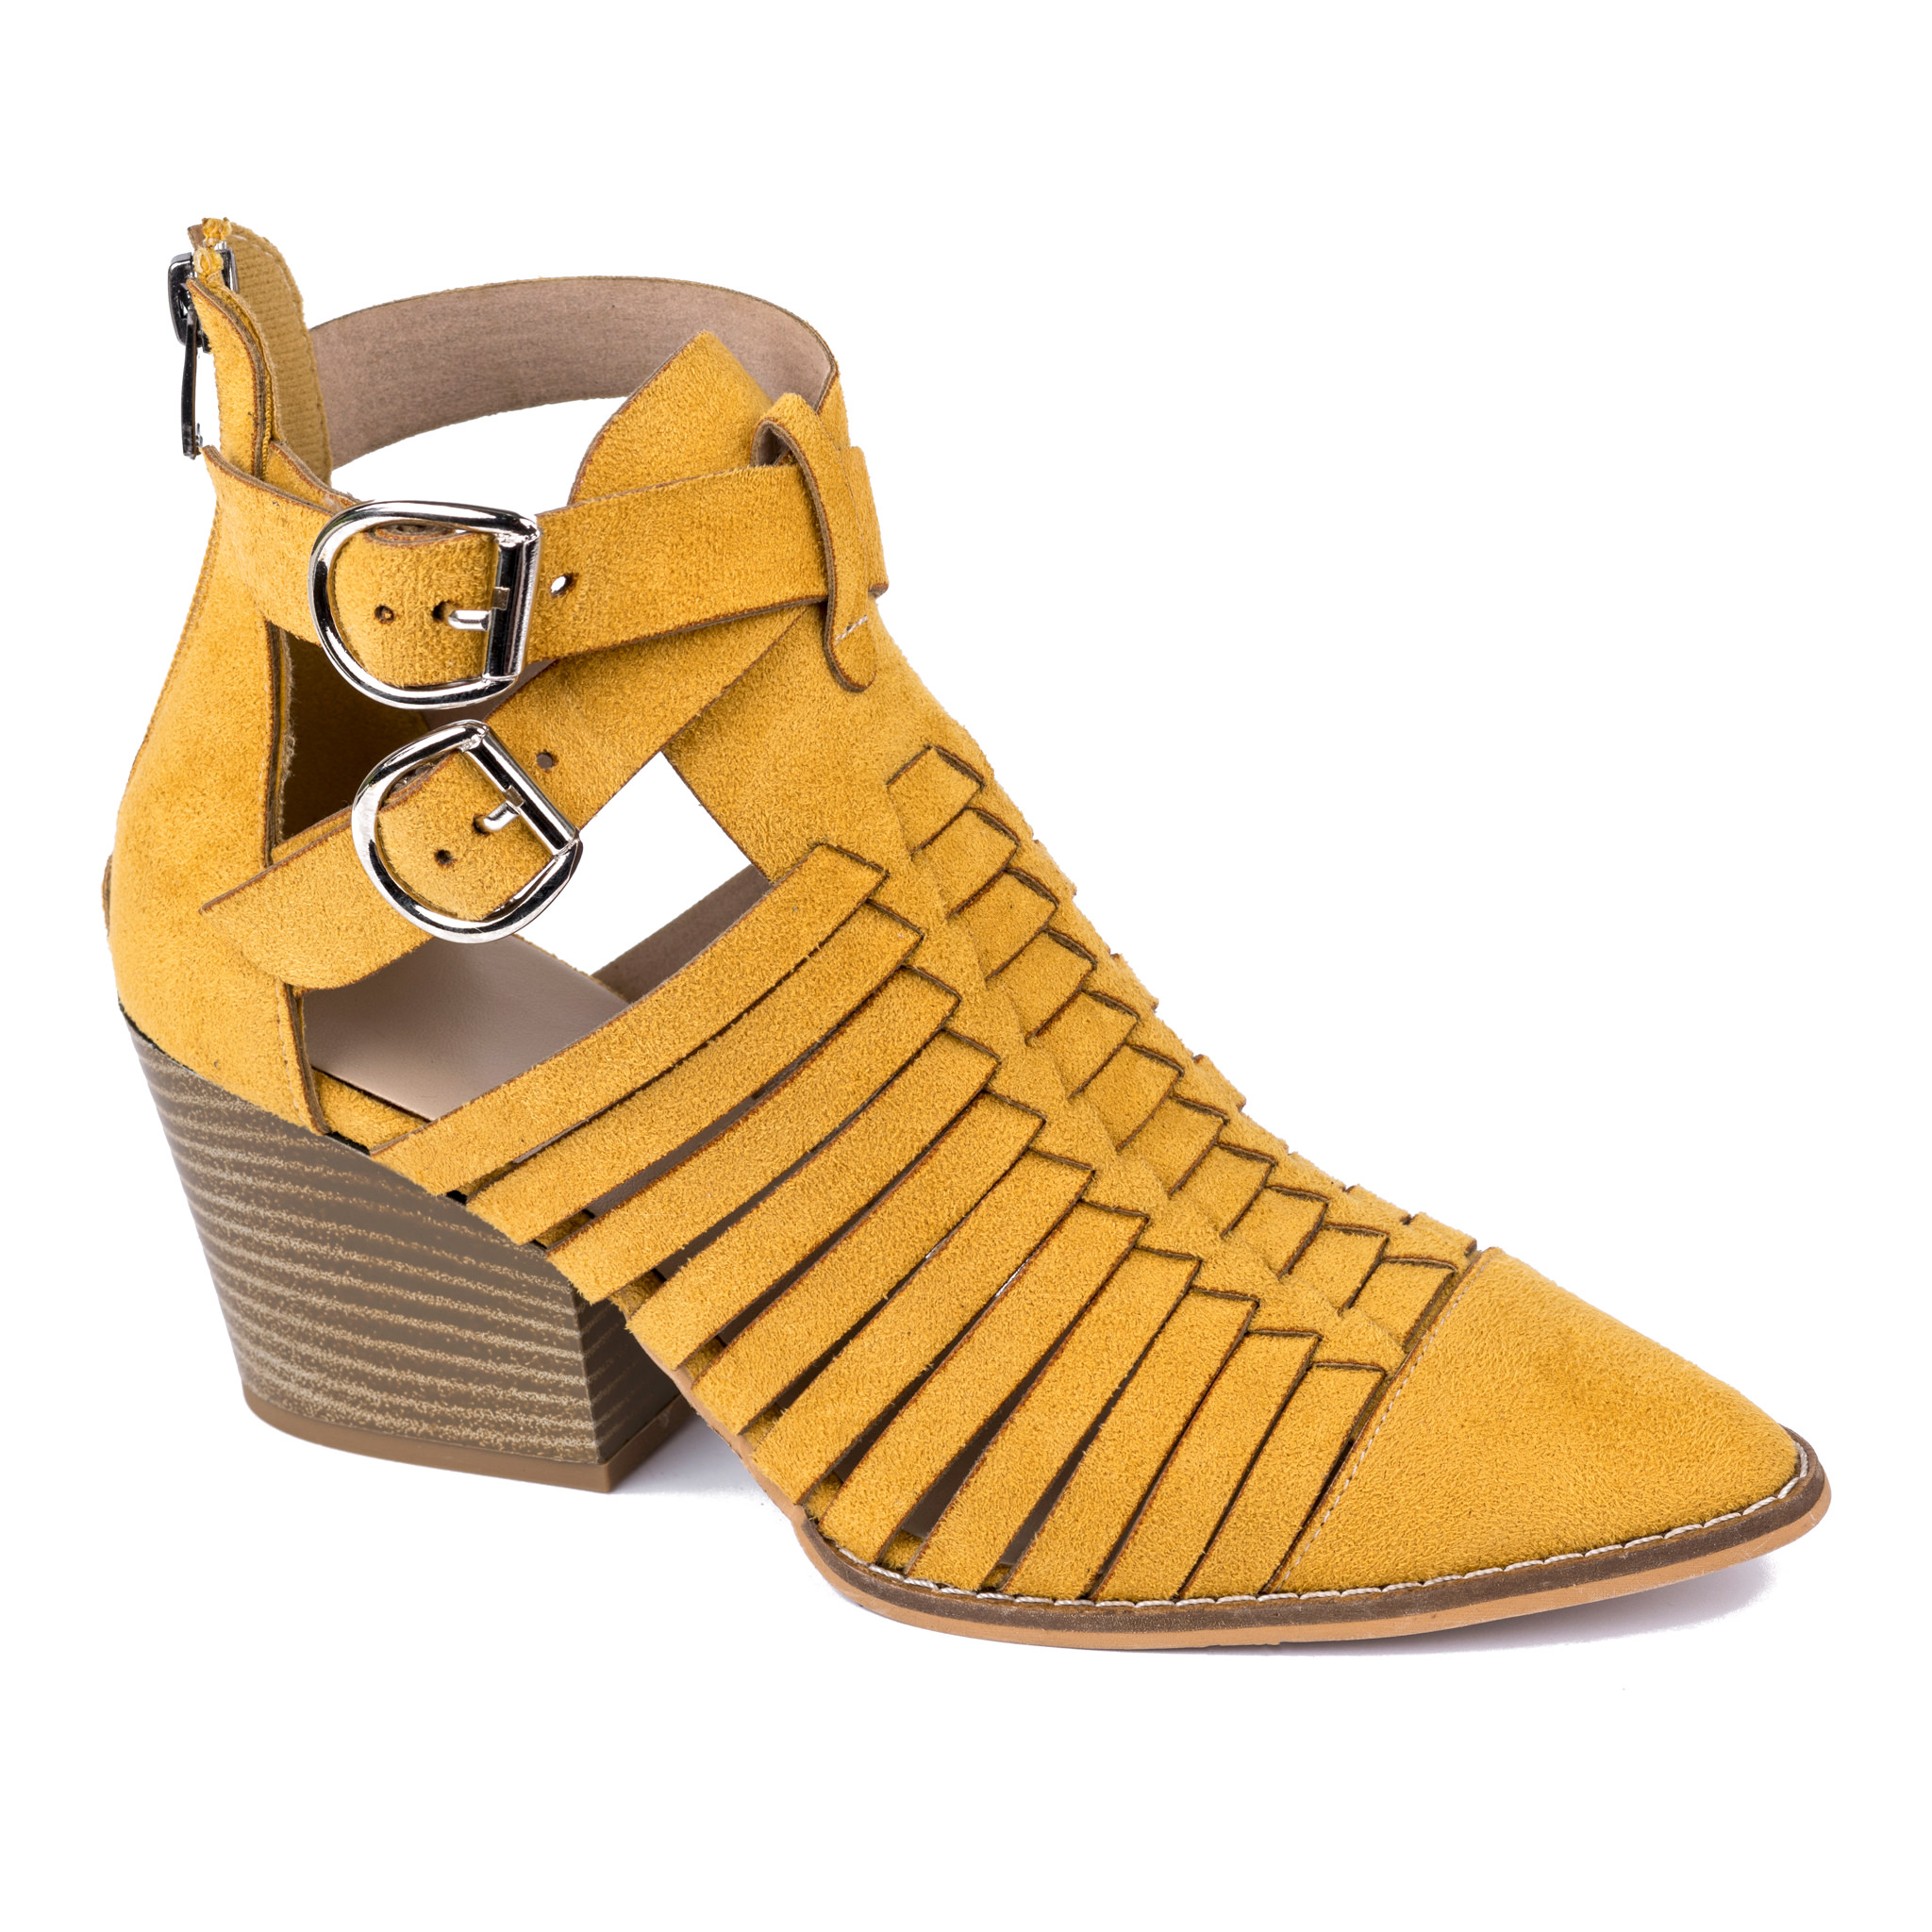 VELOUR ANKLE BOOTS WITH BLOCK HEEL - OCHER